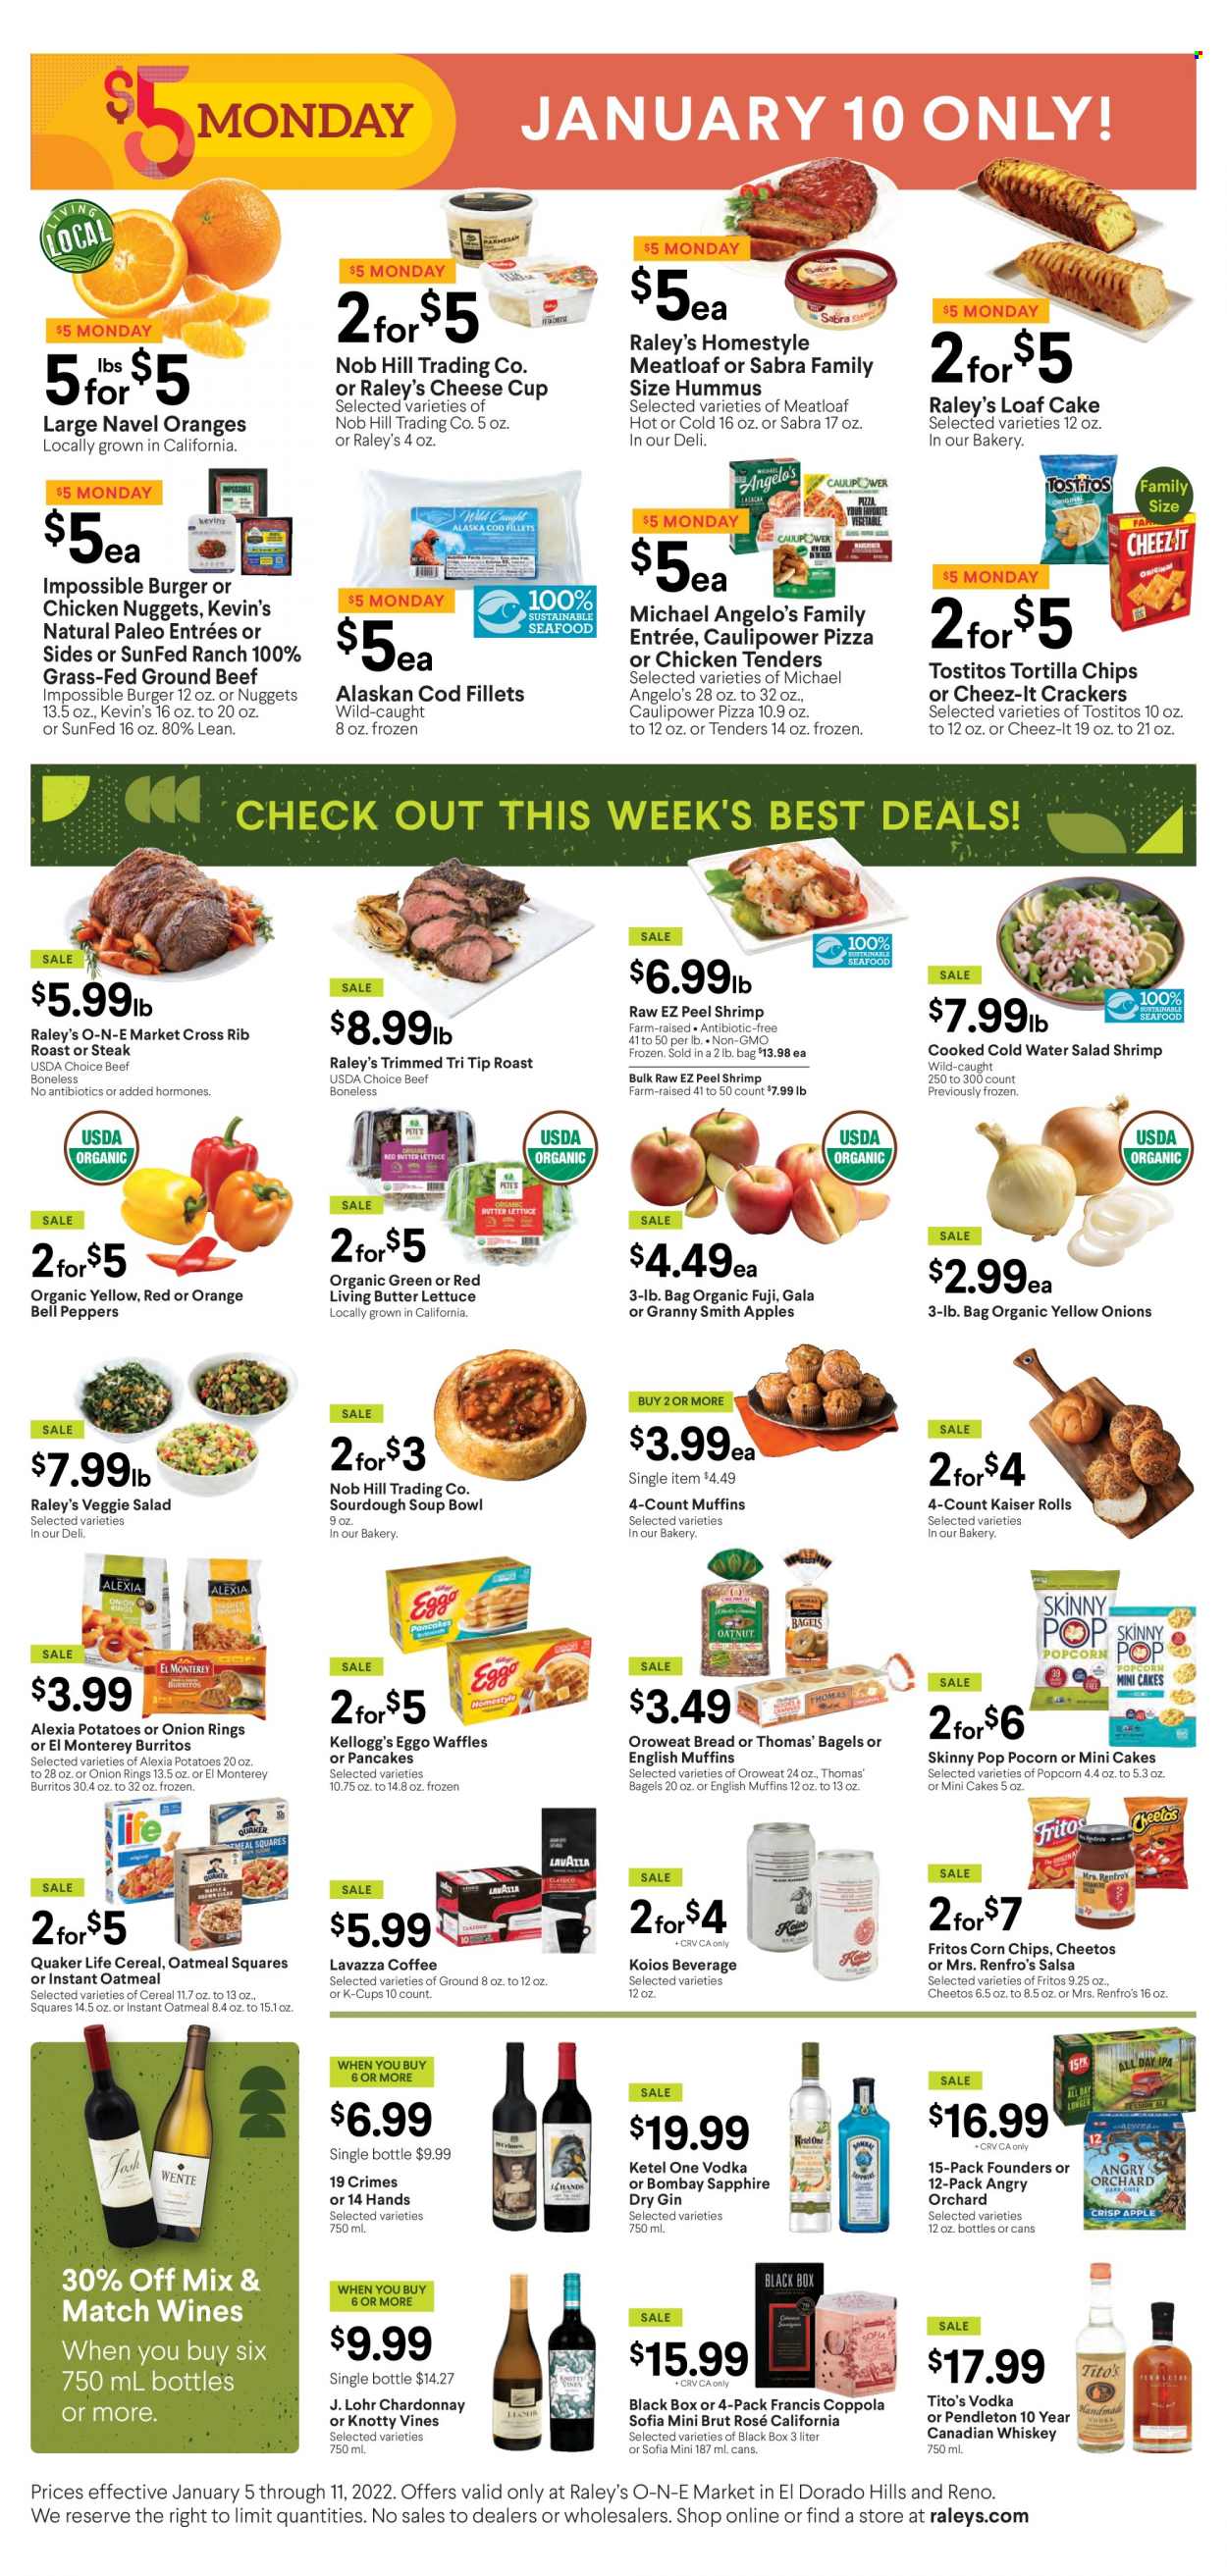 thumbnail - Raley's Flyer - 01/05/2022 - 01/11/2022 - Sales products - bagels, bread, english muffins, cake, waffles, loaf cake, bell peppers, butter lettuce, potatoes, lettuce, salad, peppers, apples, Gala, oranges, Granny Smith, cod, shrimps, pizza, onion rings, chicken tenders, nuggets, hamburger, chicken nuggets, meatloaf, burrito, Quaker, hummus, cheese cup, crackers, Kellogg's, Fritos, tortilla chips, Cheetos, corn chips, popcorn, Cheez-It, Tostitos, Skinny Pop, oatmeal, cereals, salsa, coffee, coffee capsules, K-Cups, Lavazza, white wine, Chardonnay, wine, rosé wine, gin, vodka, whiskey, whisky, beef meat, ground beef, steak, Brut, navel oranges. Page 2.